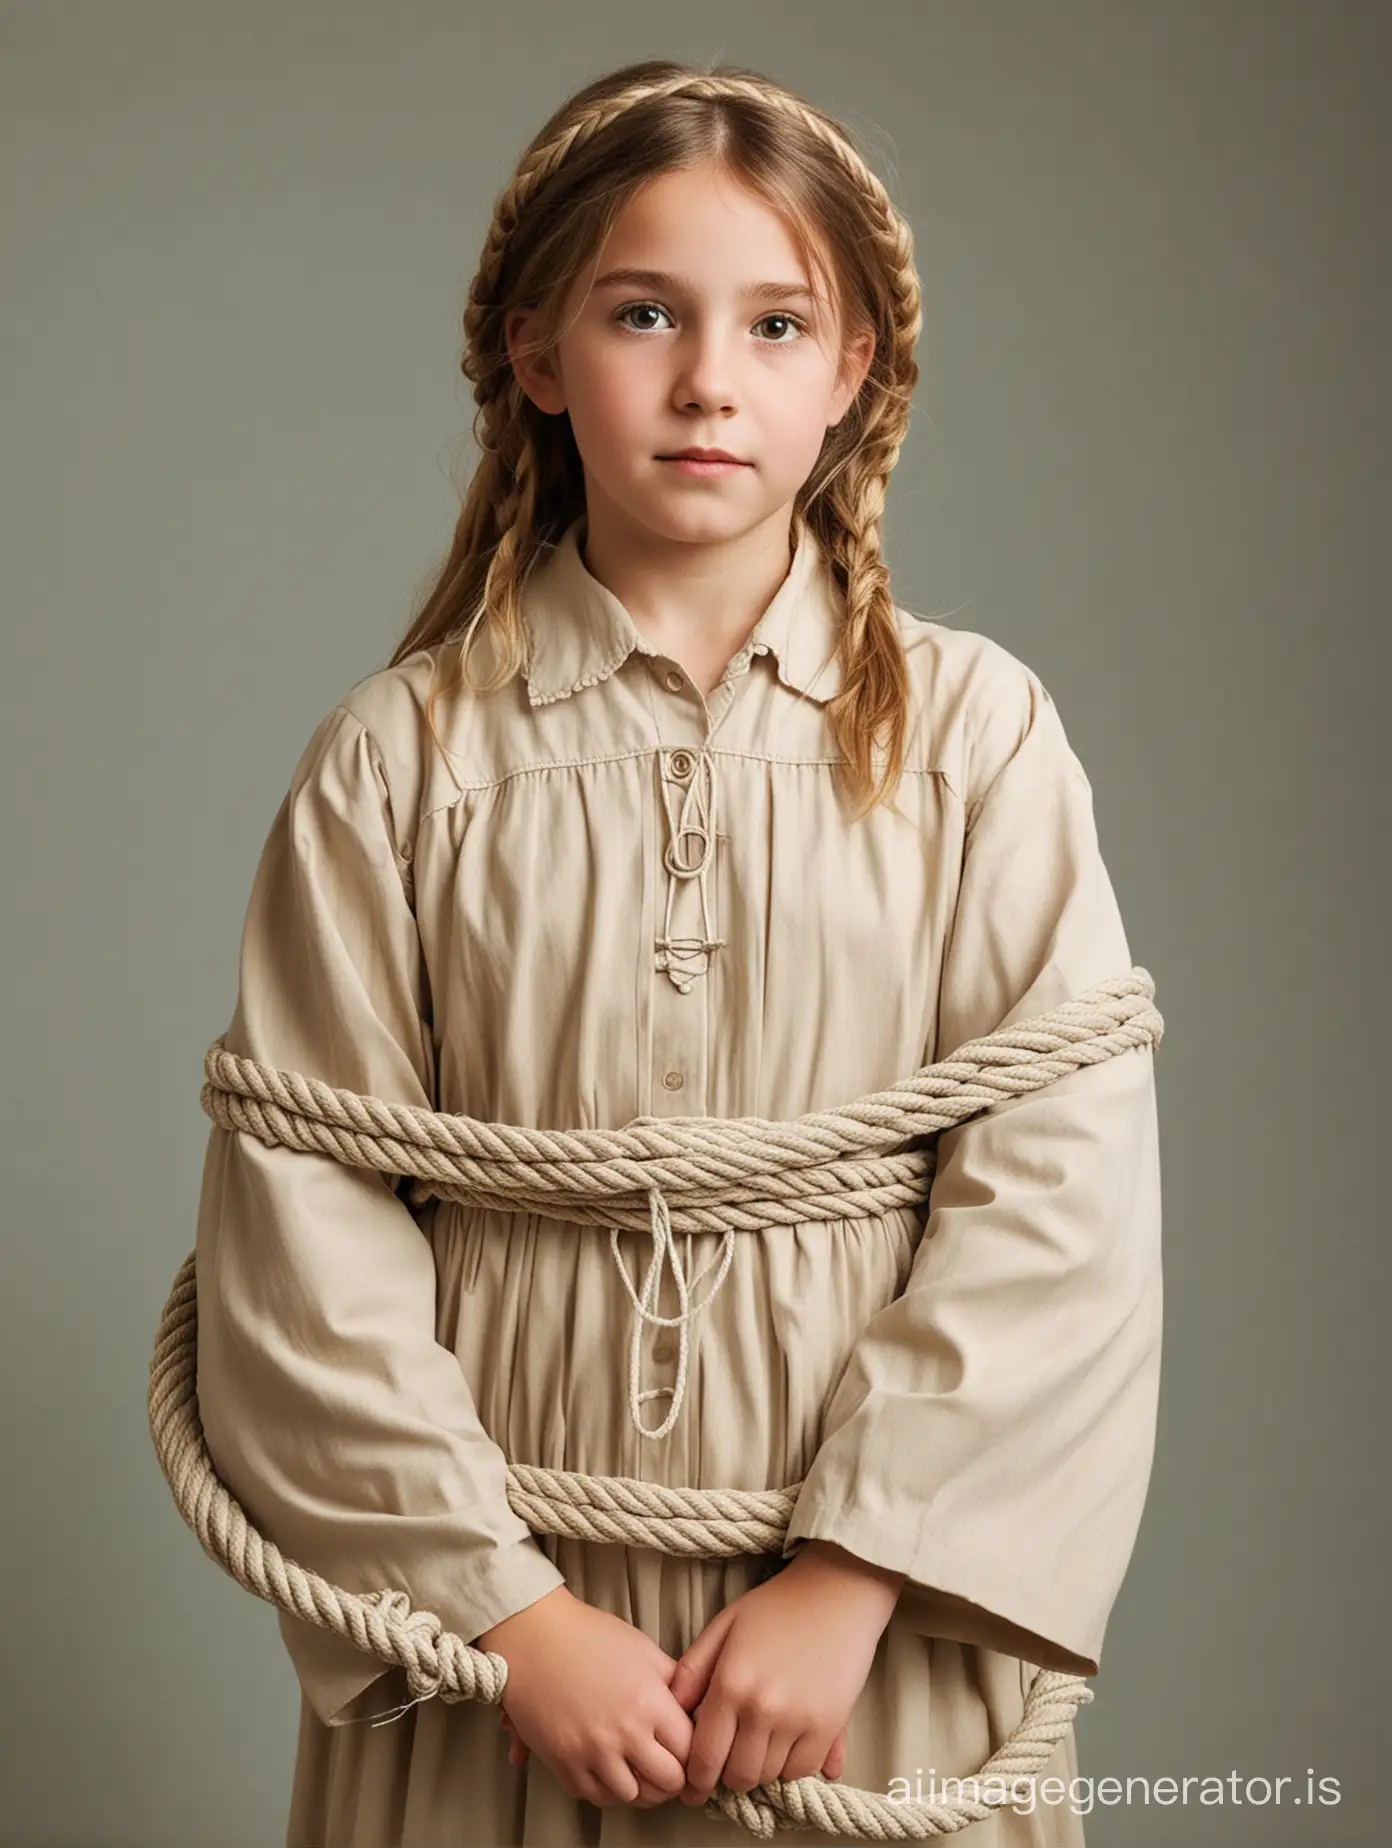 A girl in a Sunday school dress wrapped in ropes.